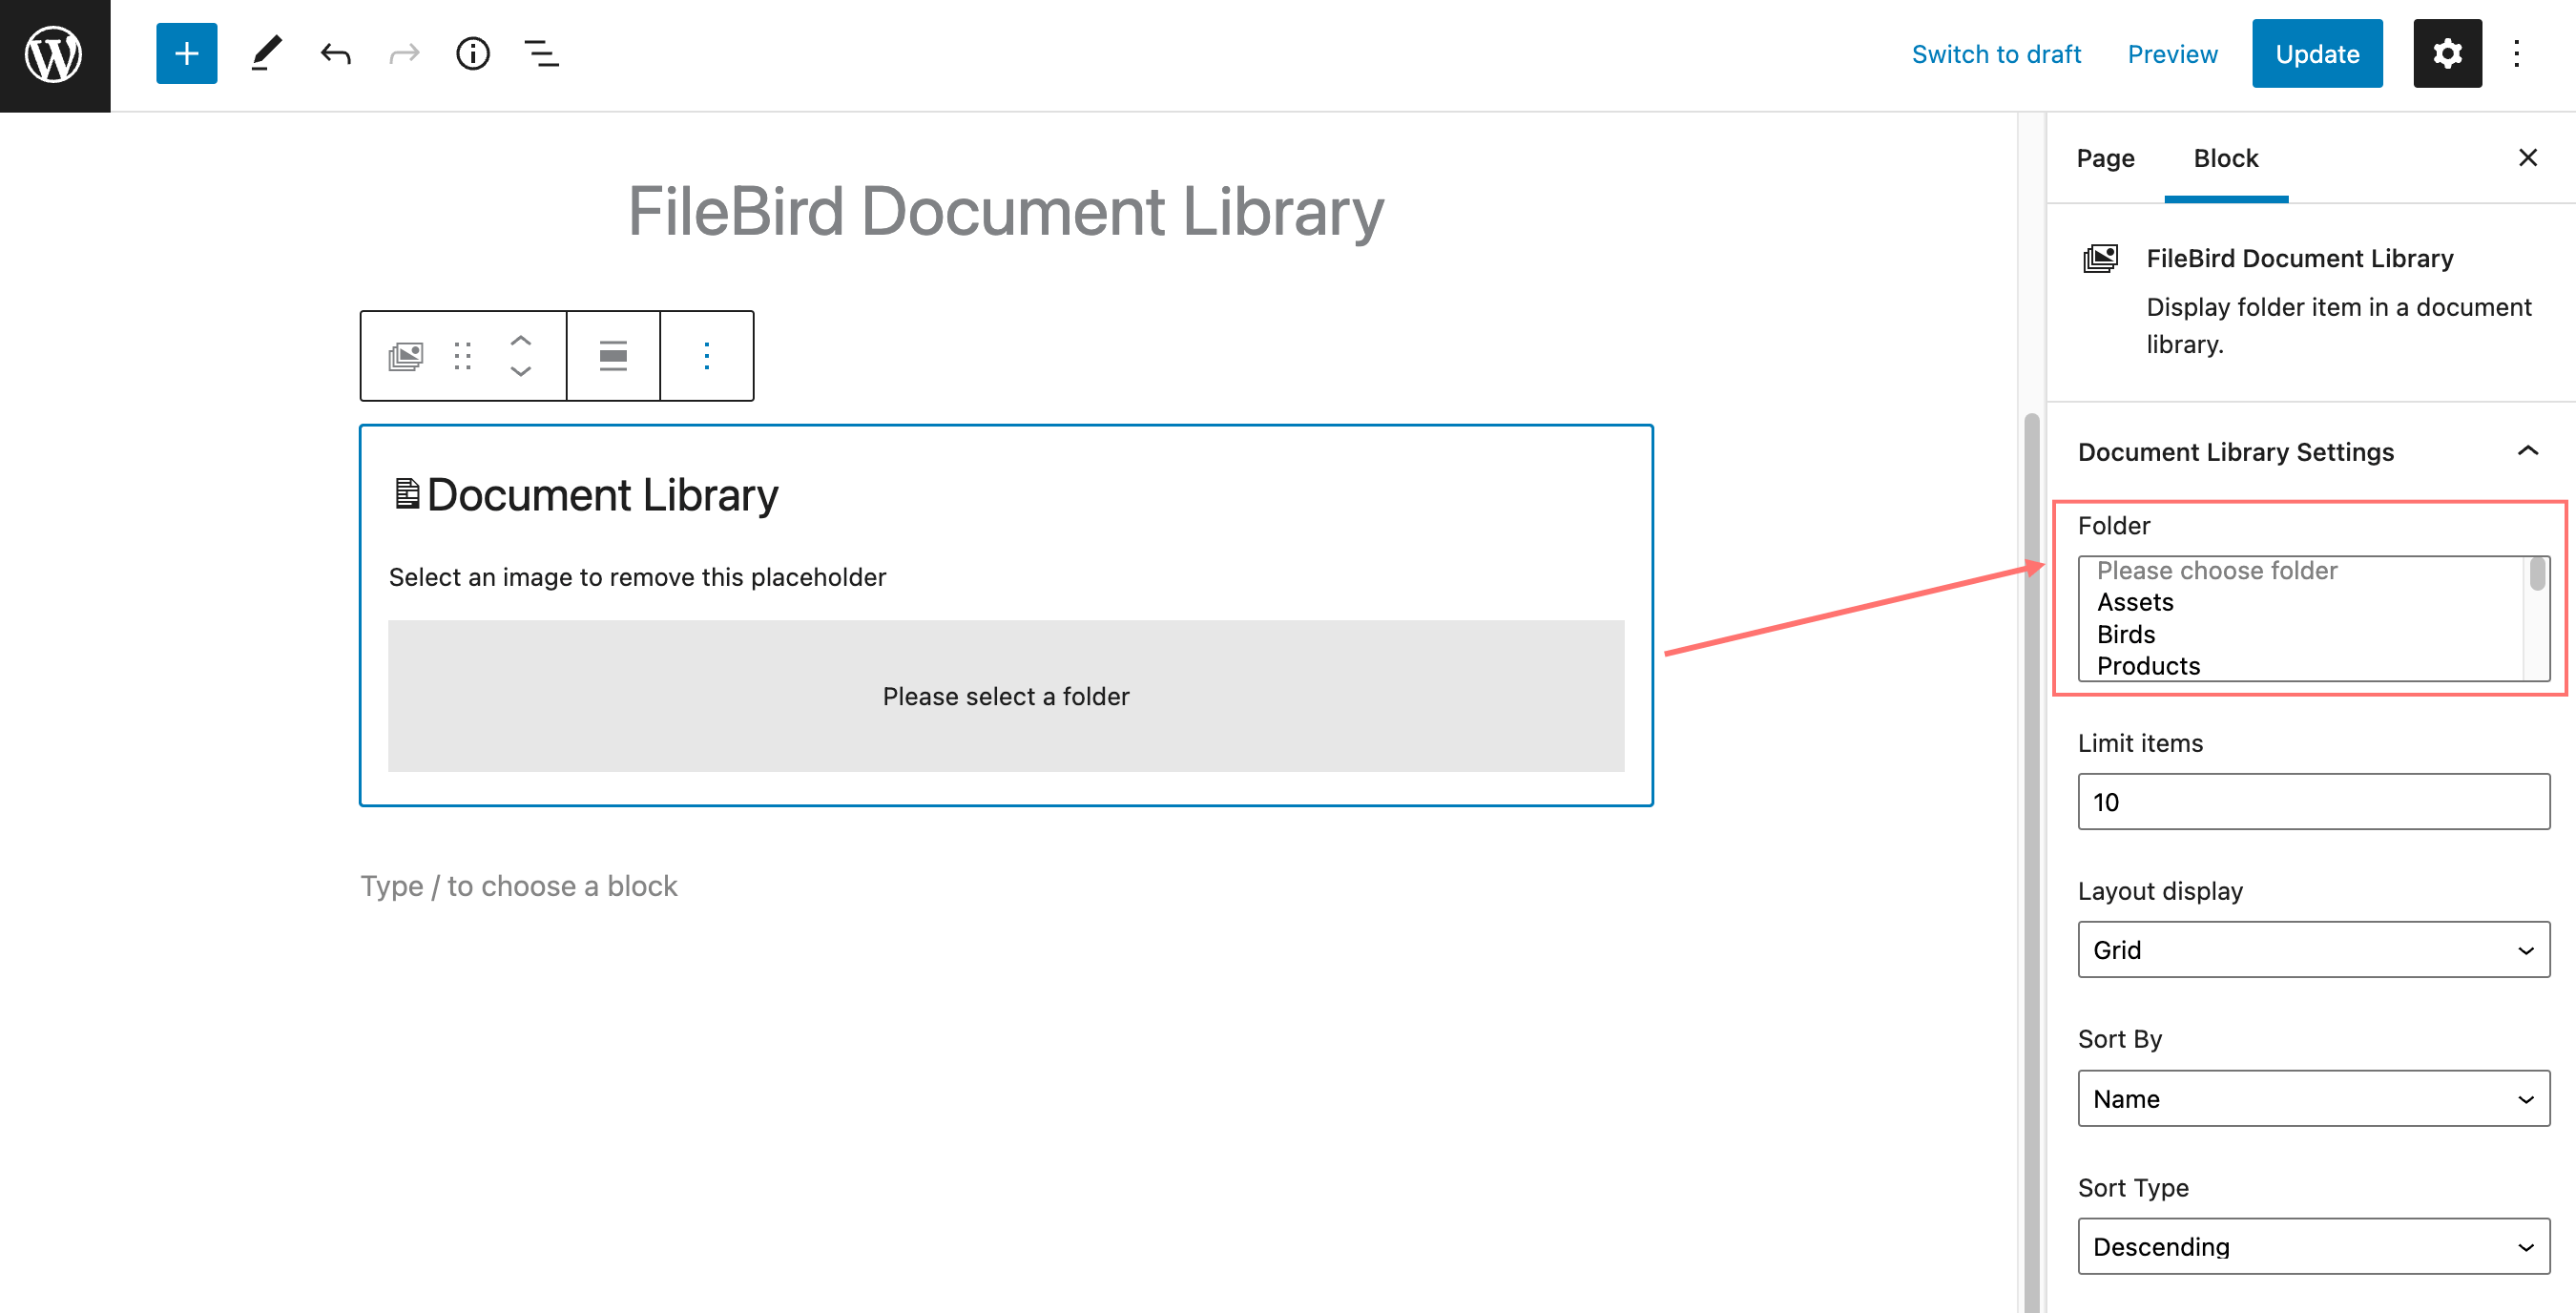 Select a folder to output files and display document library